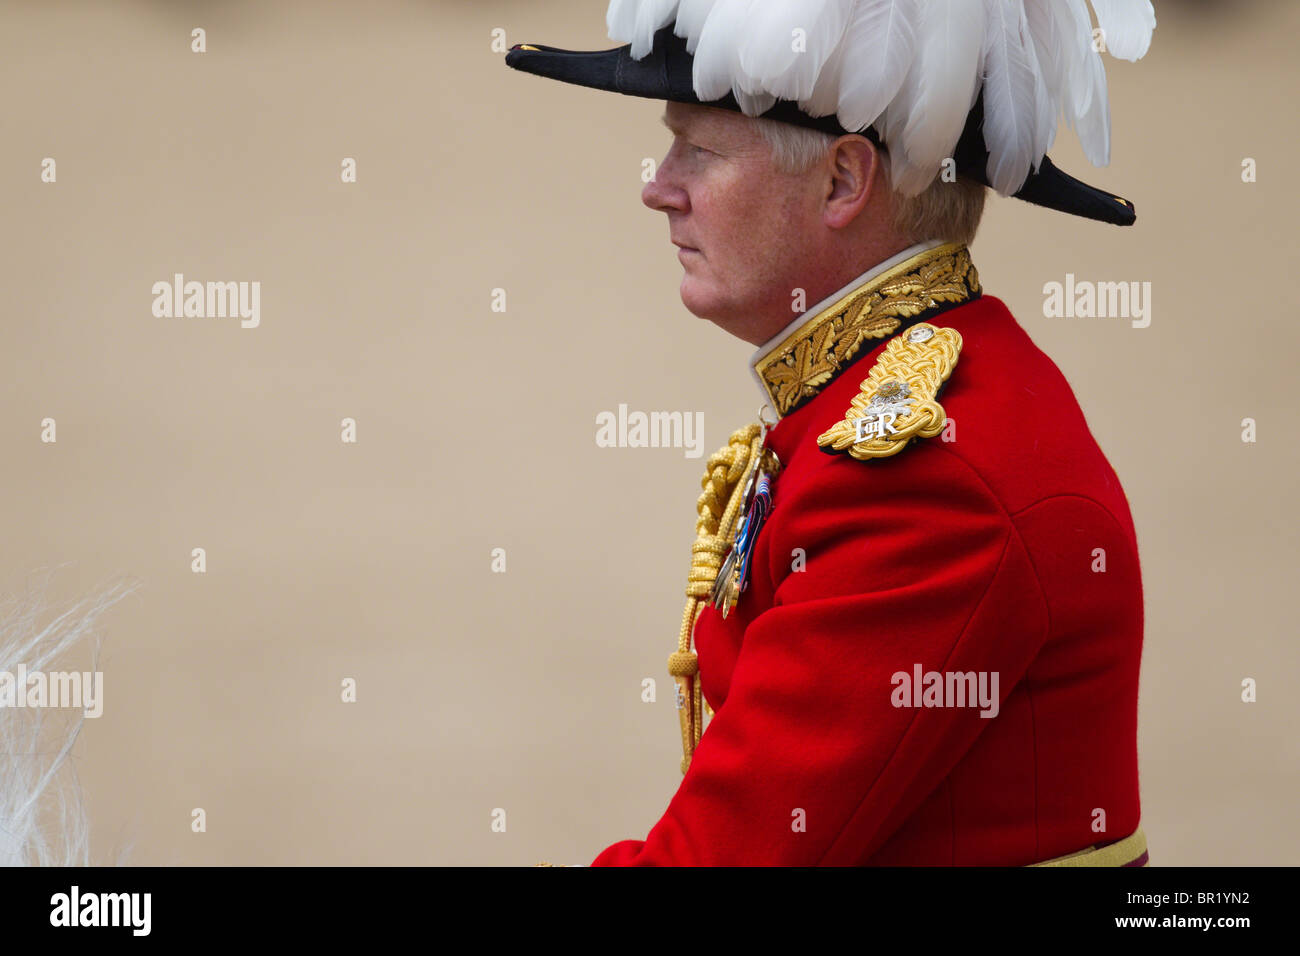 Close-up of Major General W G Cubitt. 'Trooping the Colour' 2010 Stock Photo